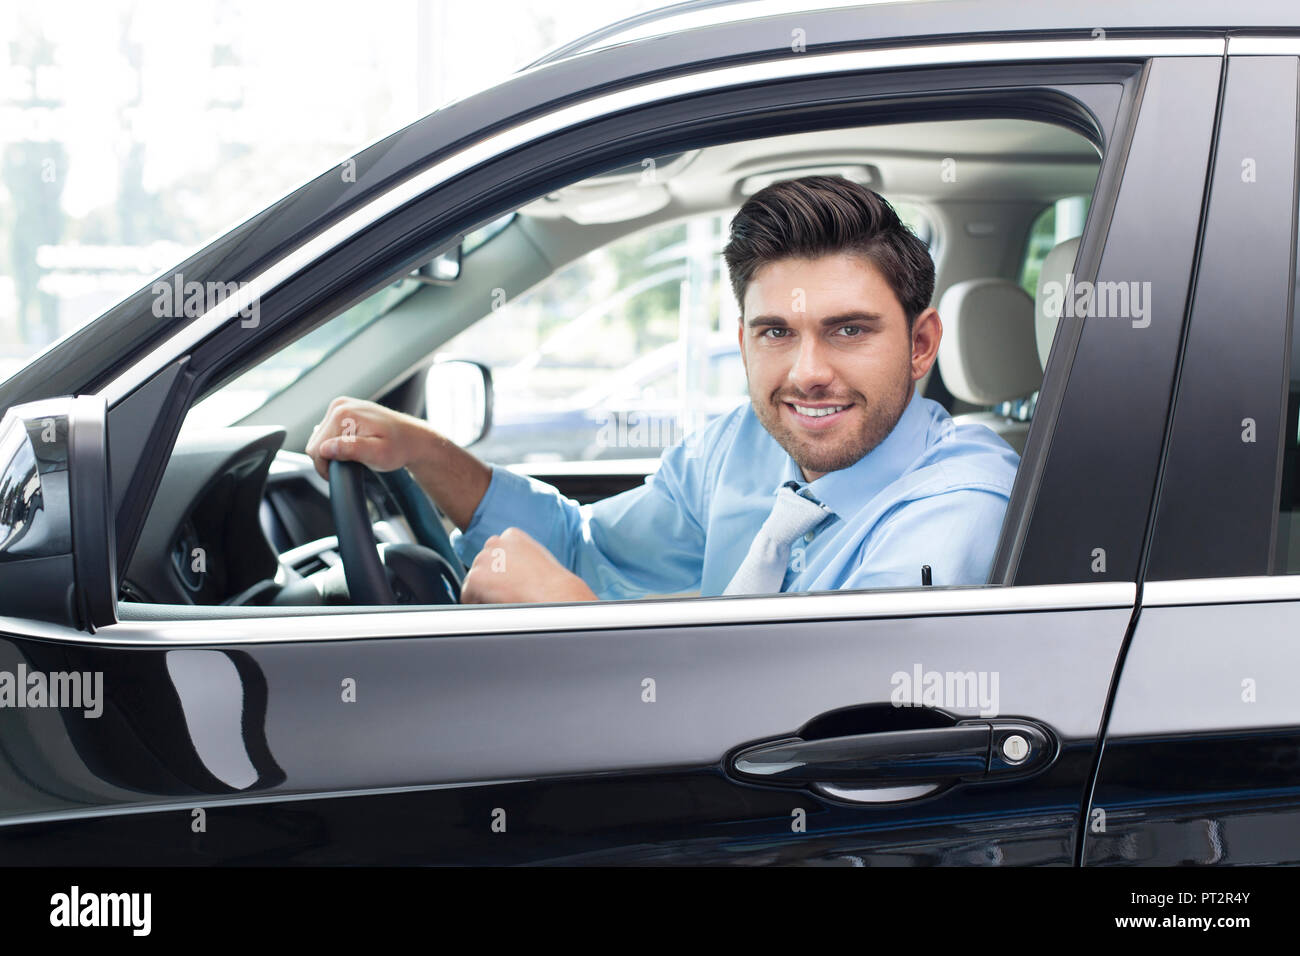 At the car dealer, Man sitting in new car Stock Photo